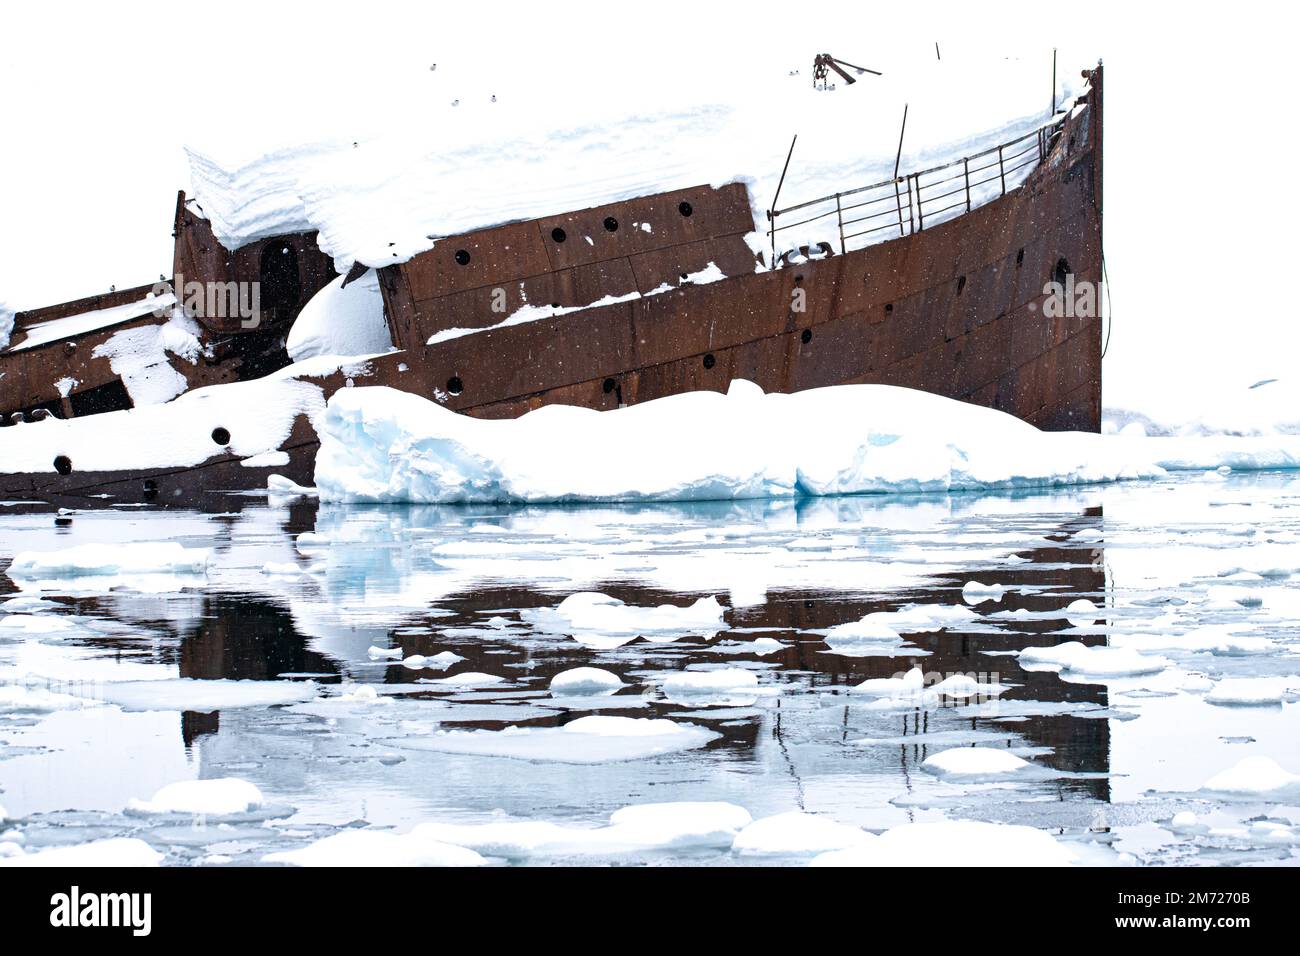 A metal whaling ship sunk into the icy cold water around Antarctica, Foyn Harbor. Stock Photo